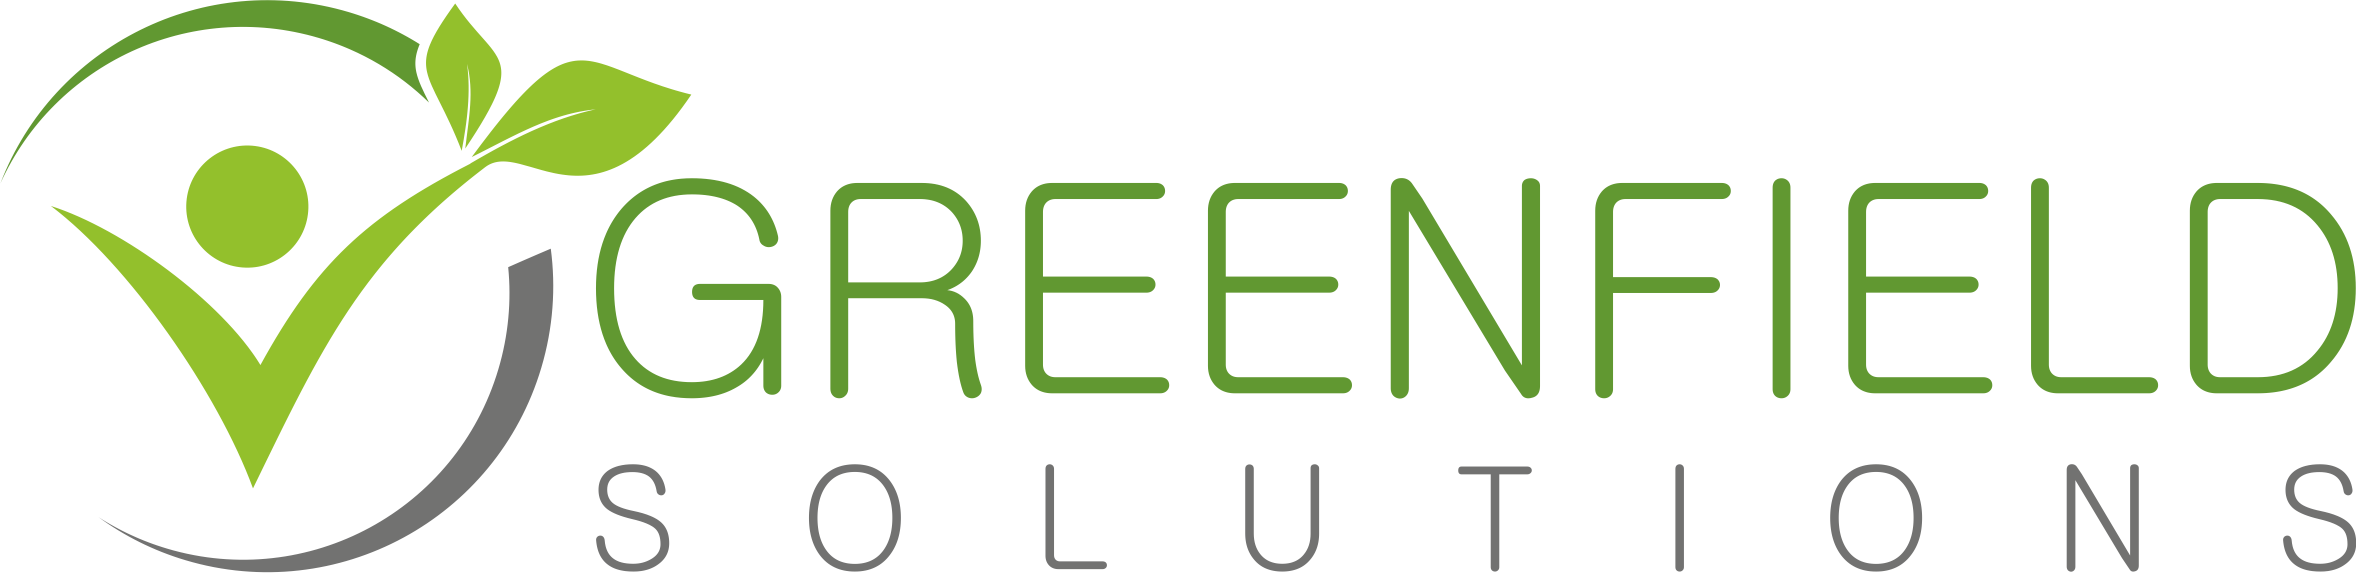 Greenfield Solution